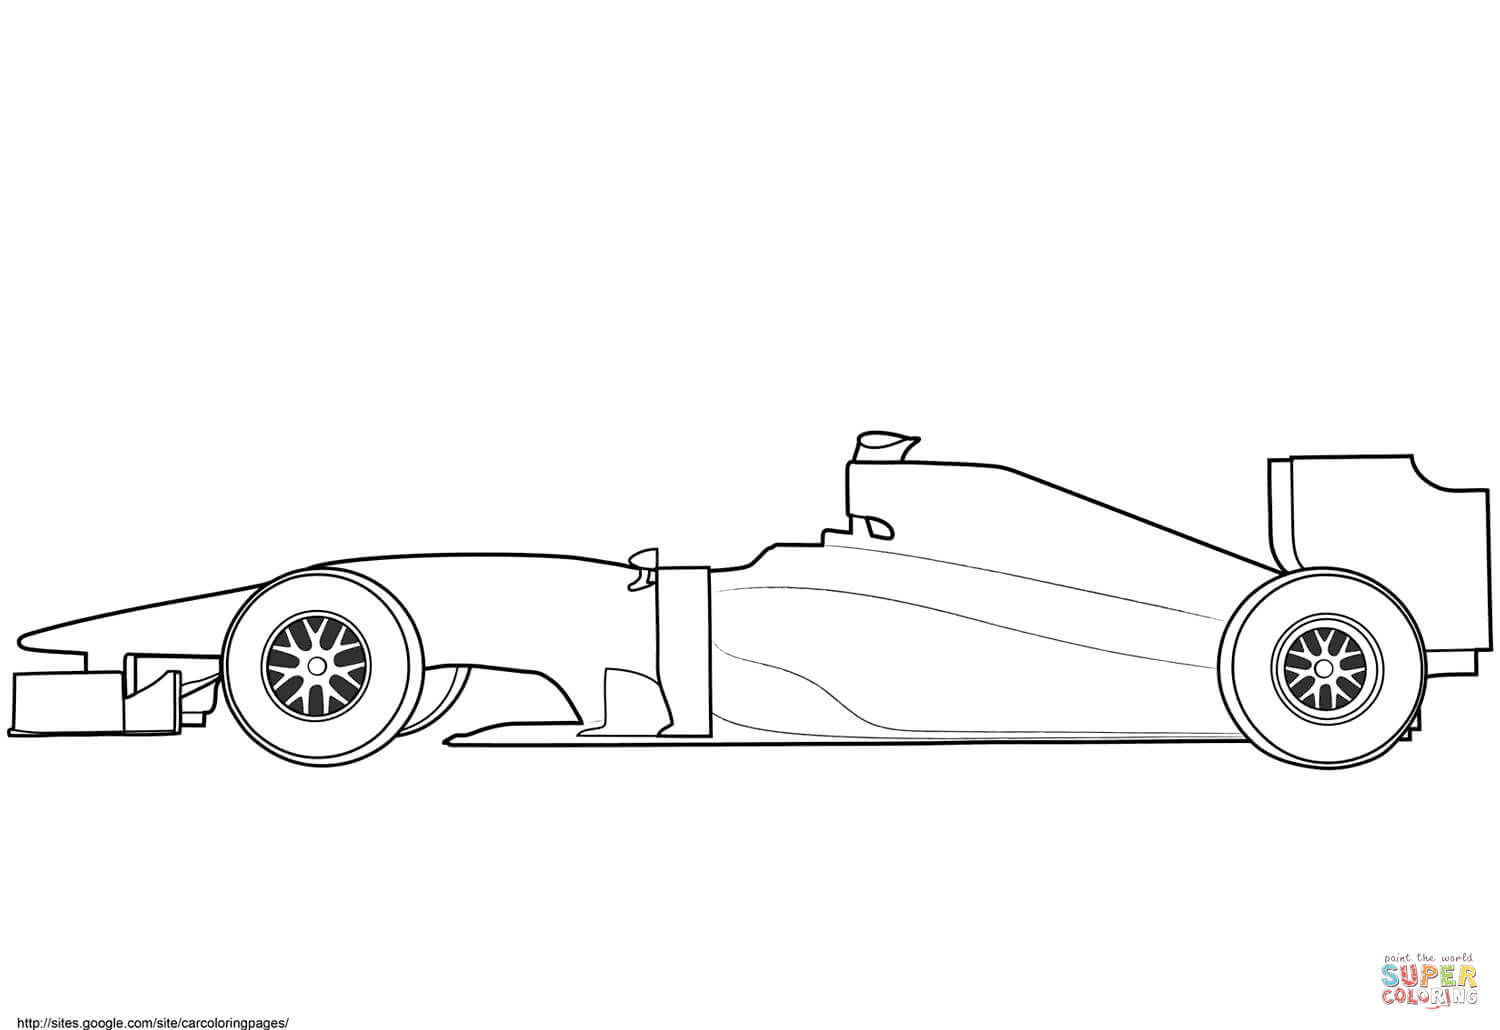 Blank Formula 1 Race Car Coloring Page | Free Printable Pertaining To Blank Race Car Templates